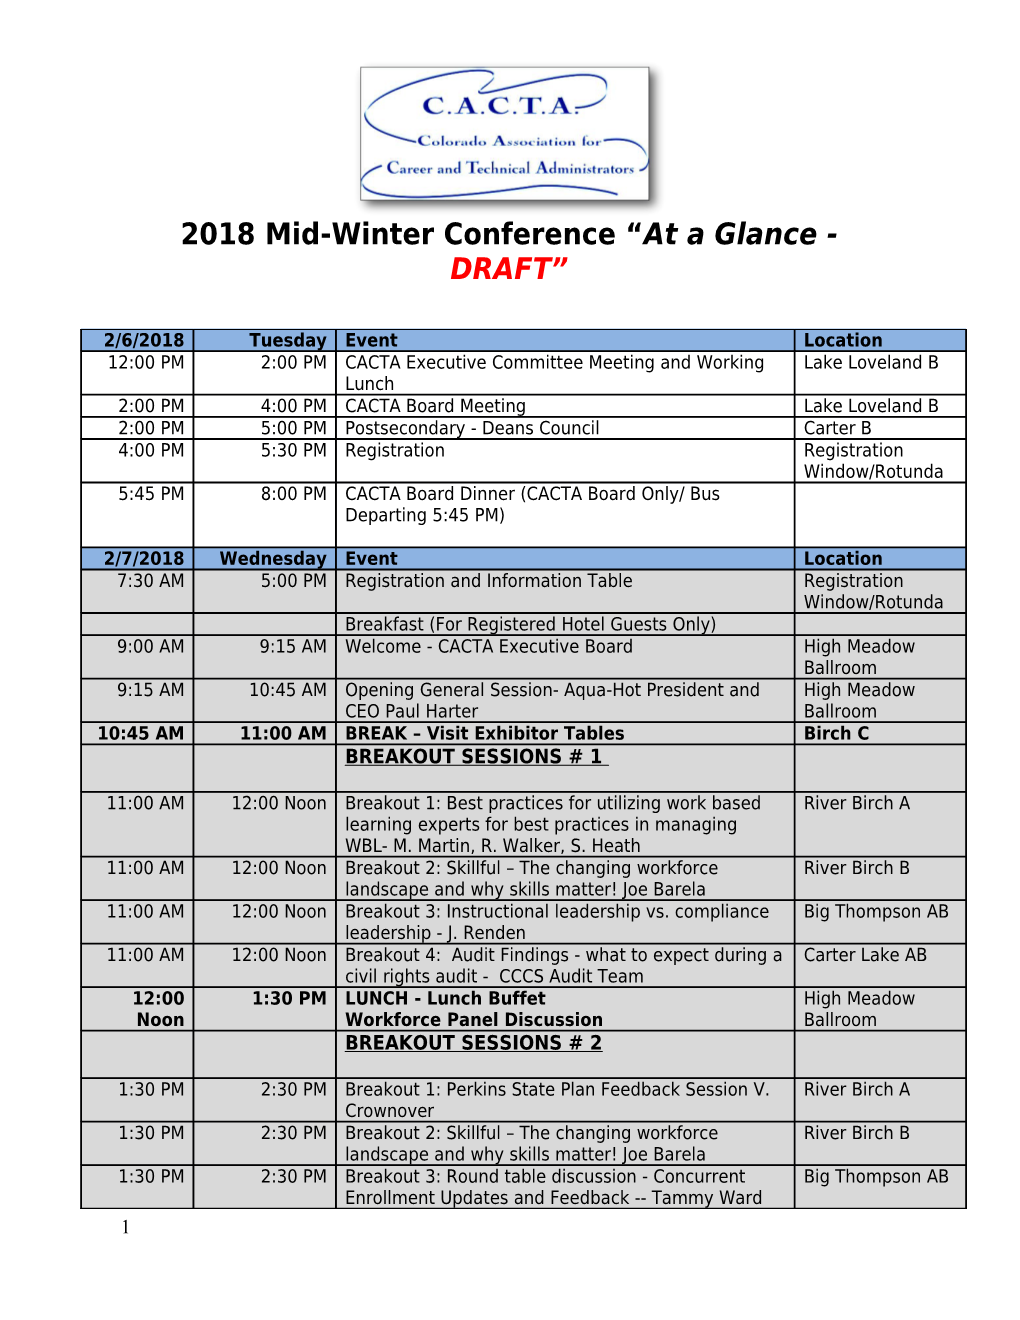 2018 Mid-Winter Conference at a Glance - DRAFT